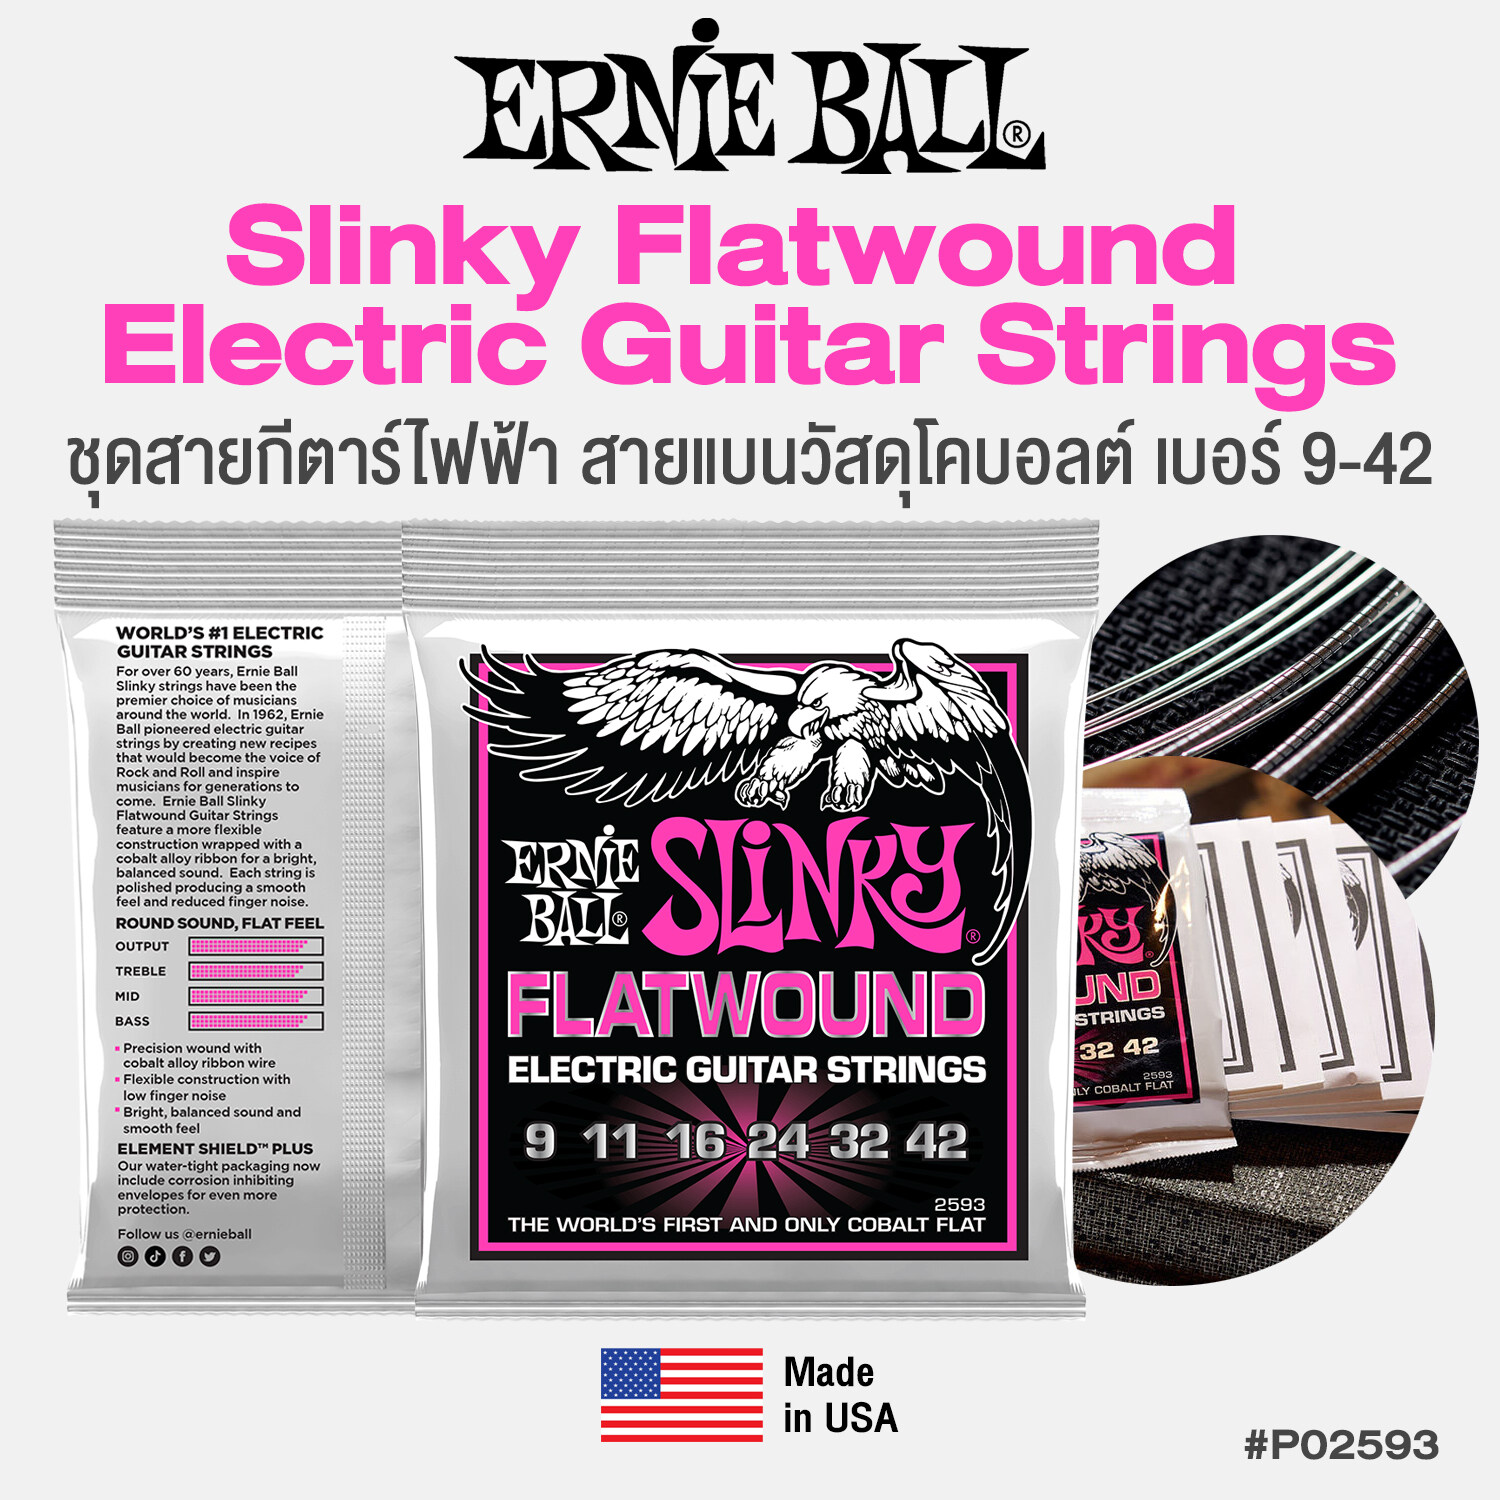 Slinky Flatwound Electric Guitar Strings